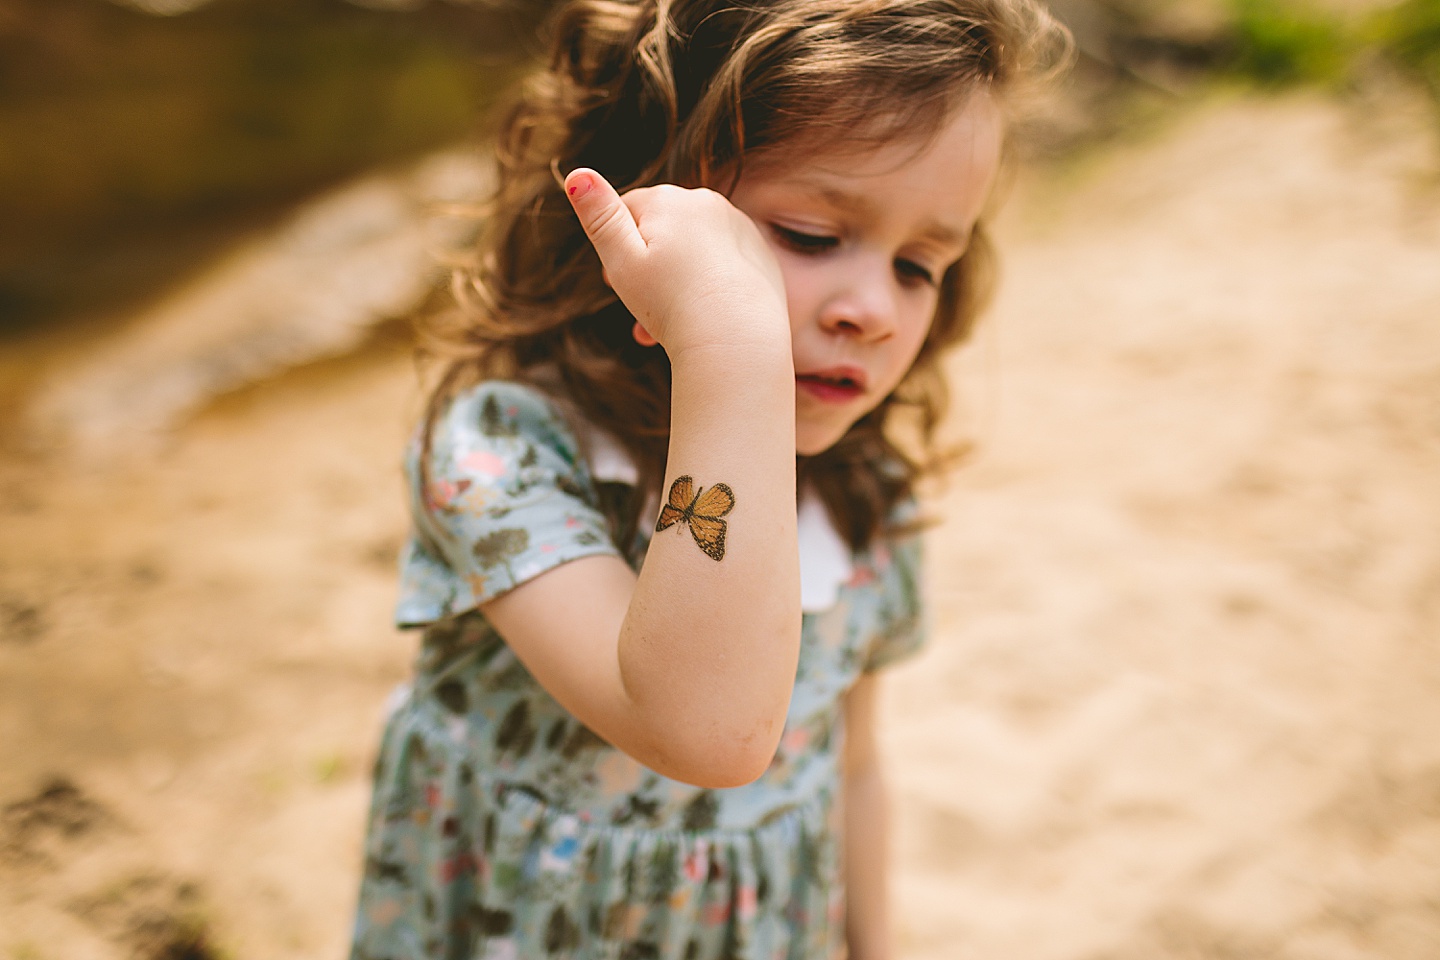 Little kid showing off a temporary butterfly tattoo